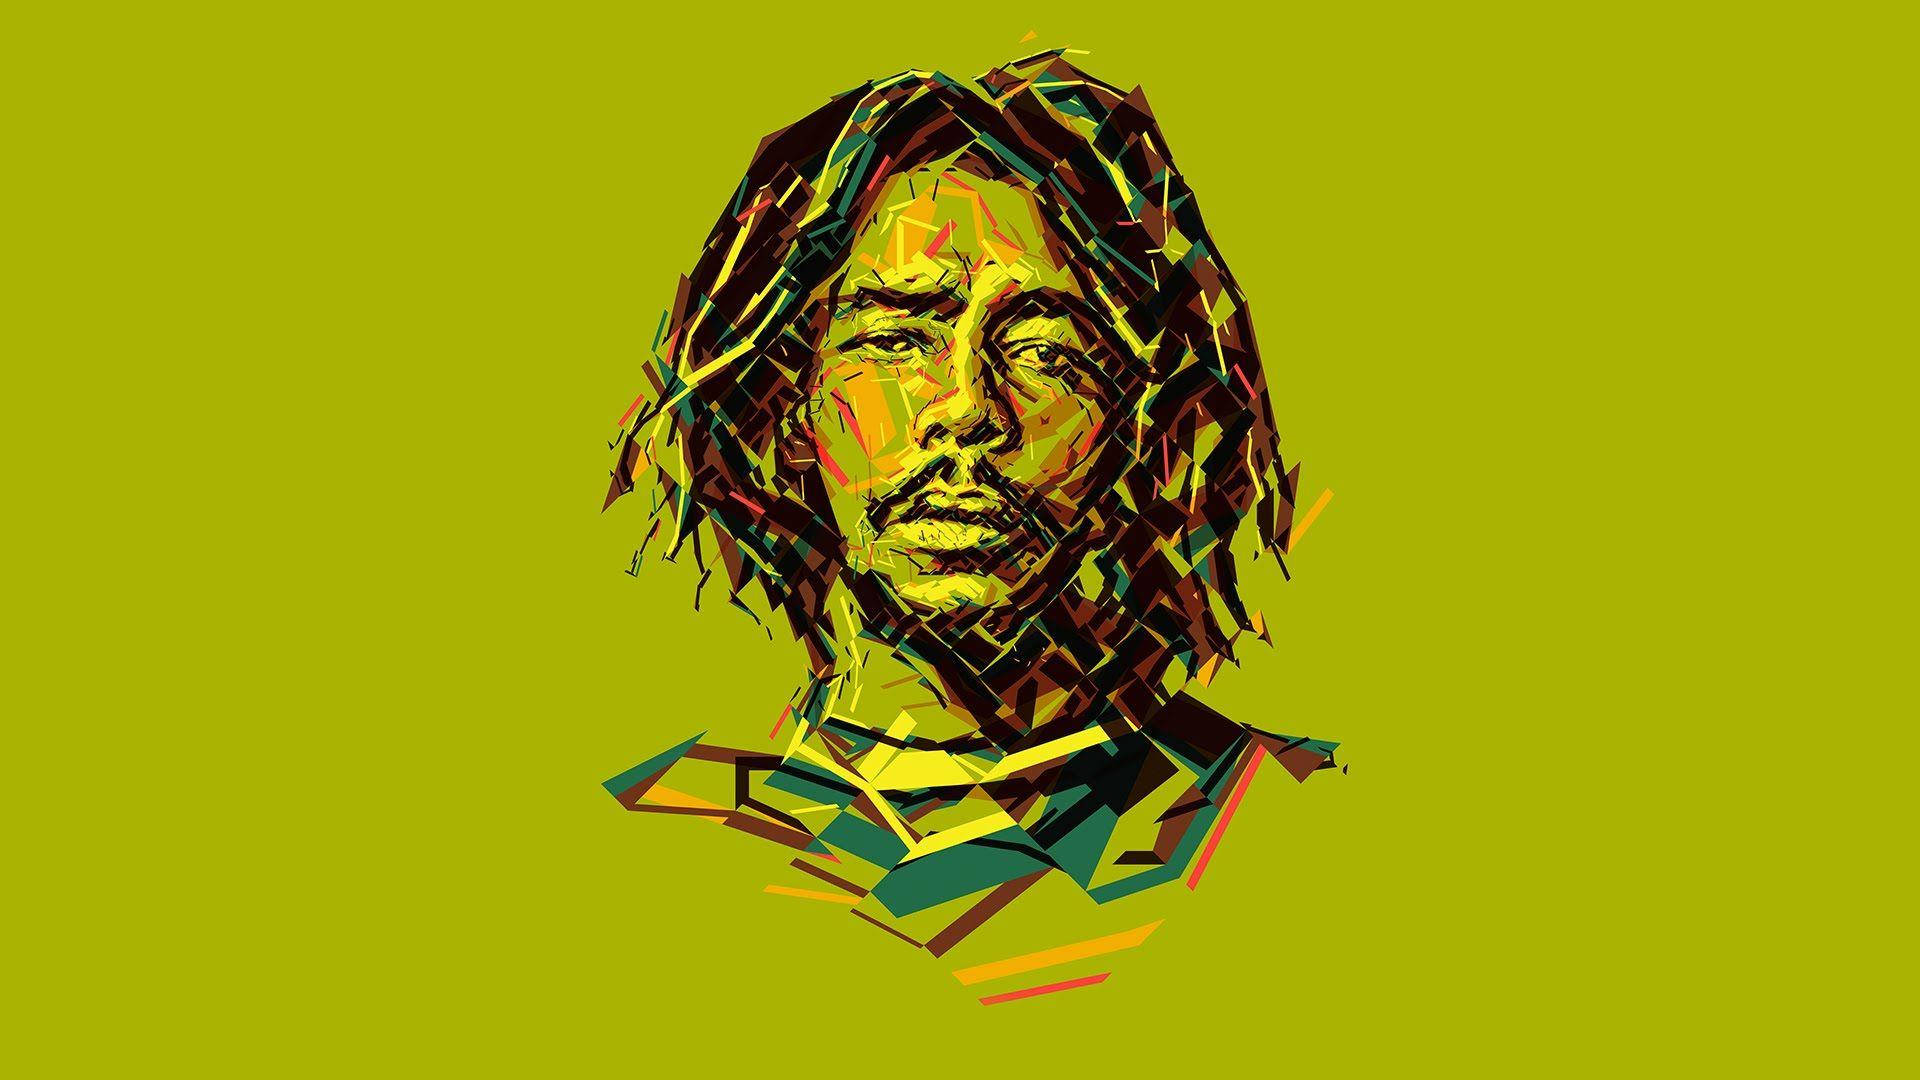 Bob Marley And The Wailers Stylized Portrait Wallpaper